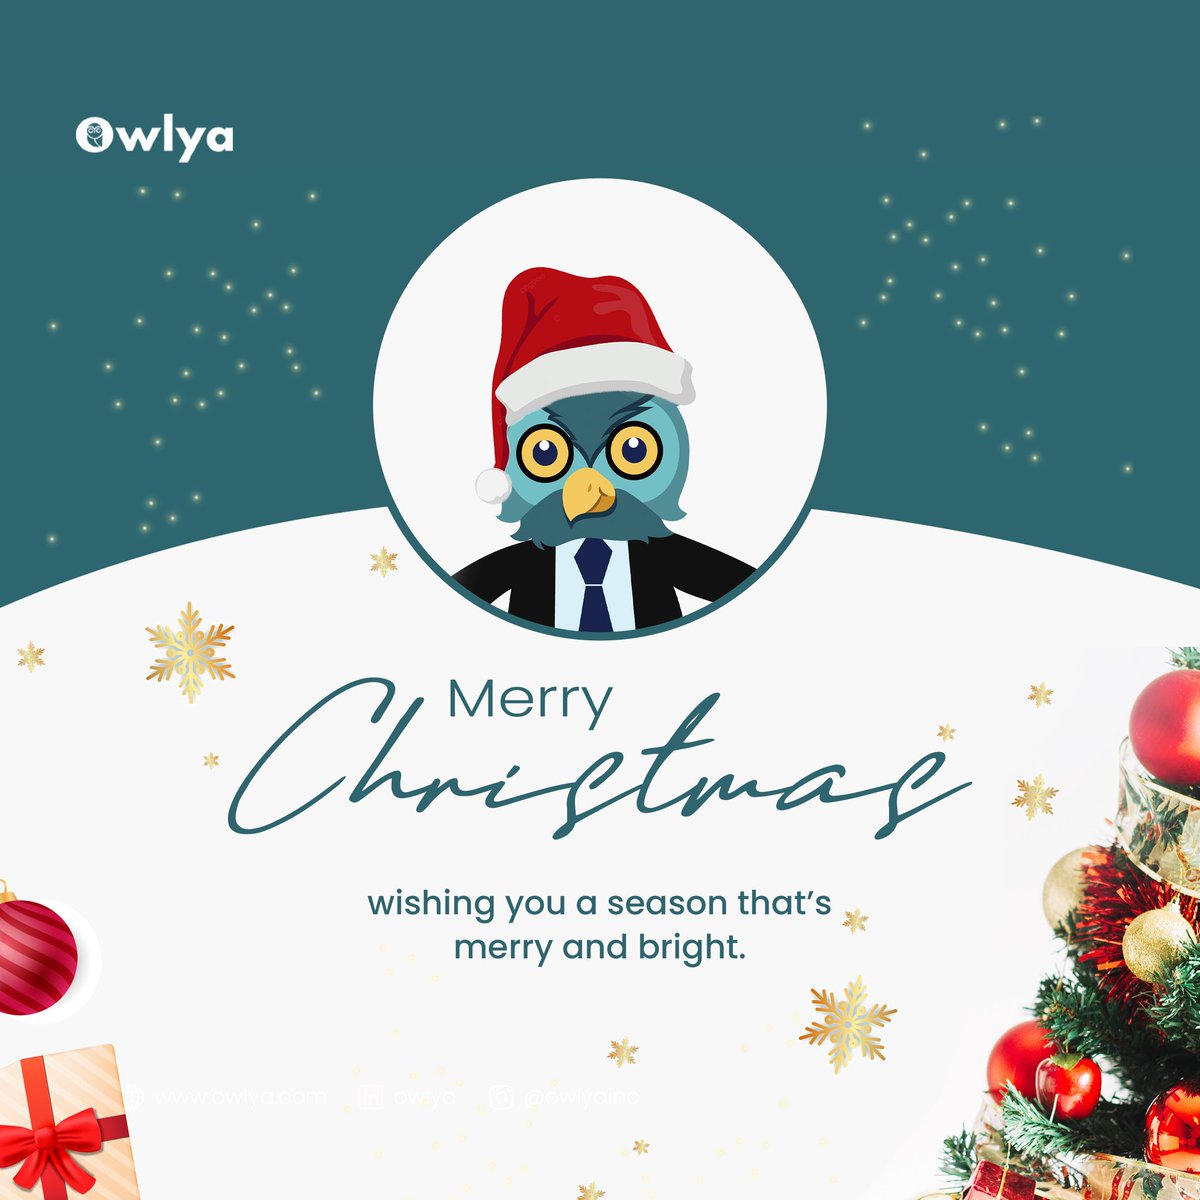 Unwrapping joy and spreading cheer this festive season . Merry Christmas

.
#Owlya #liveproctoring #EducationTech #assessment #onlineassessment #AssessmentManagement  #owlyachristmas